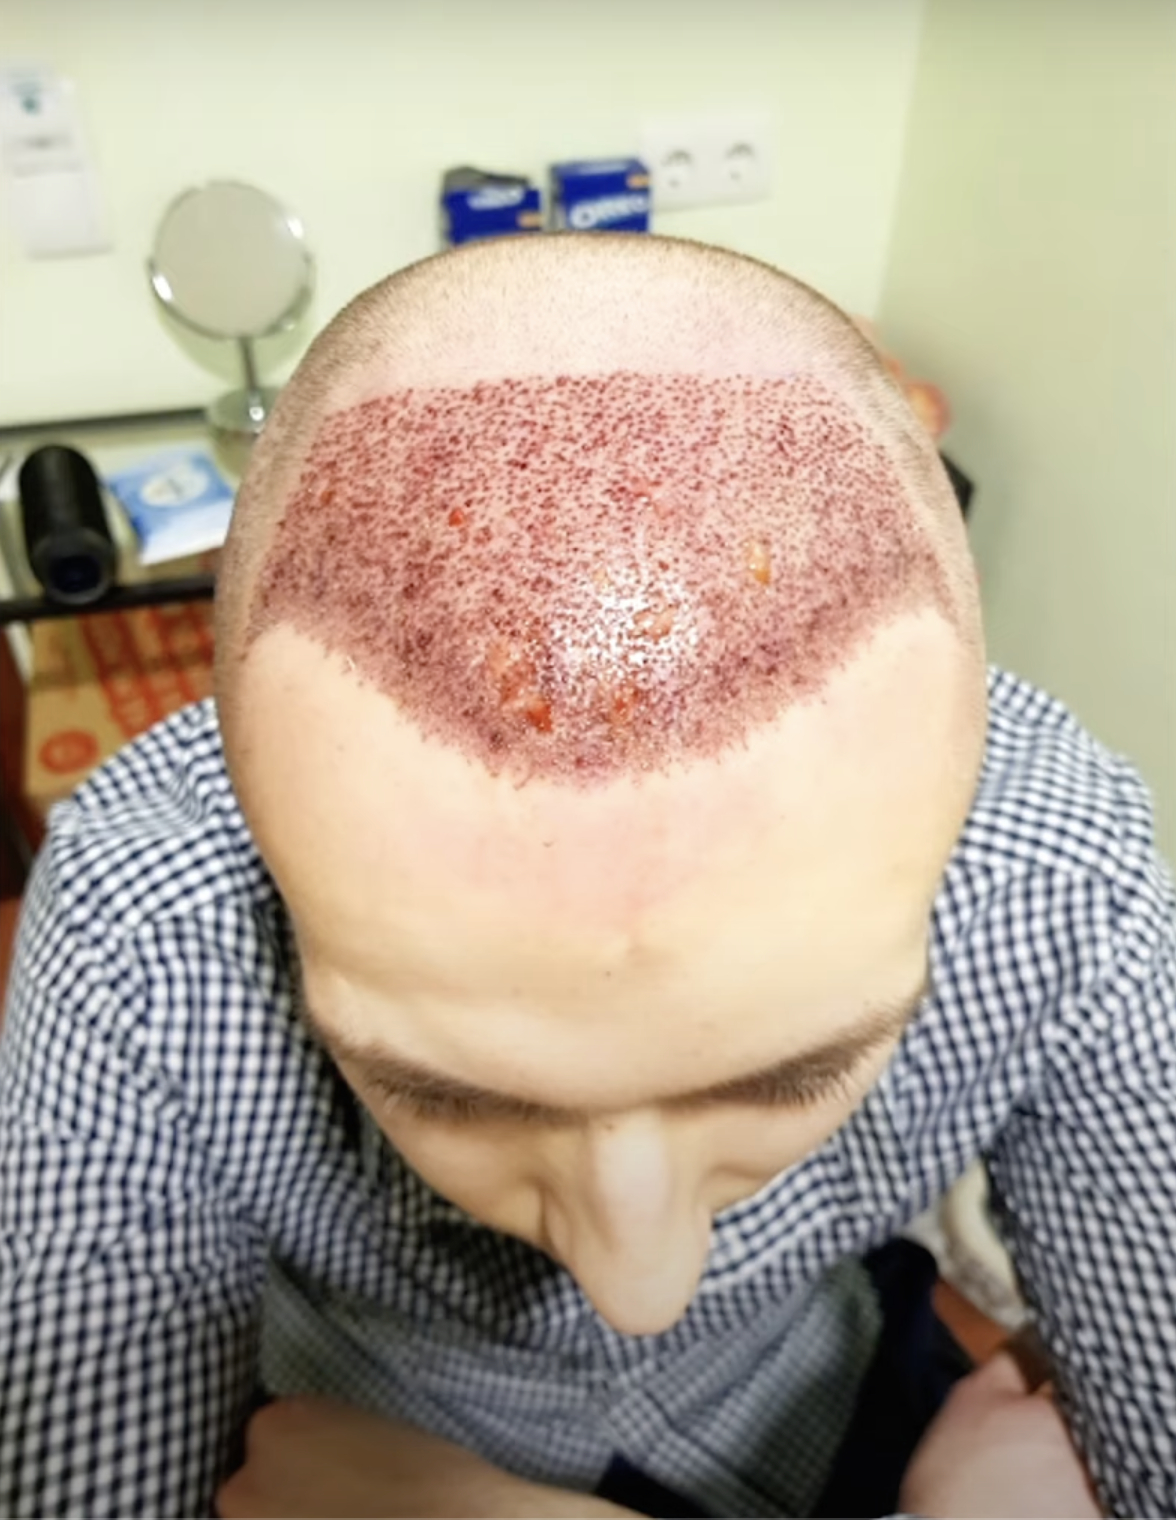 Immediately after FUE surgery